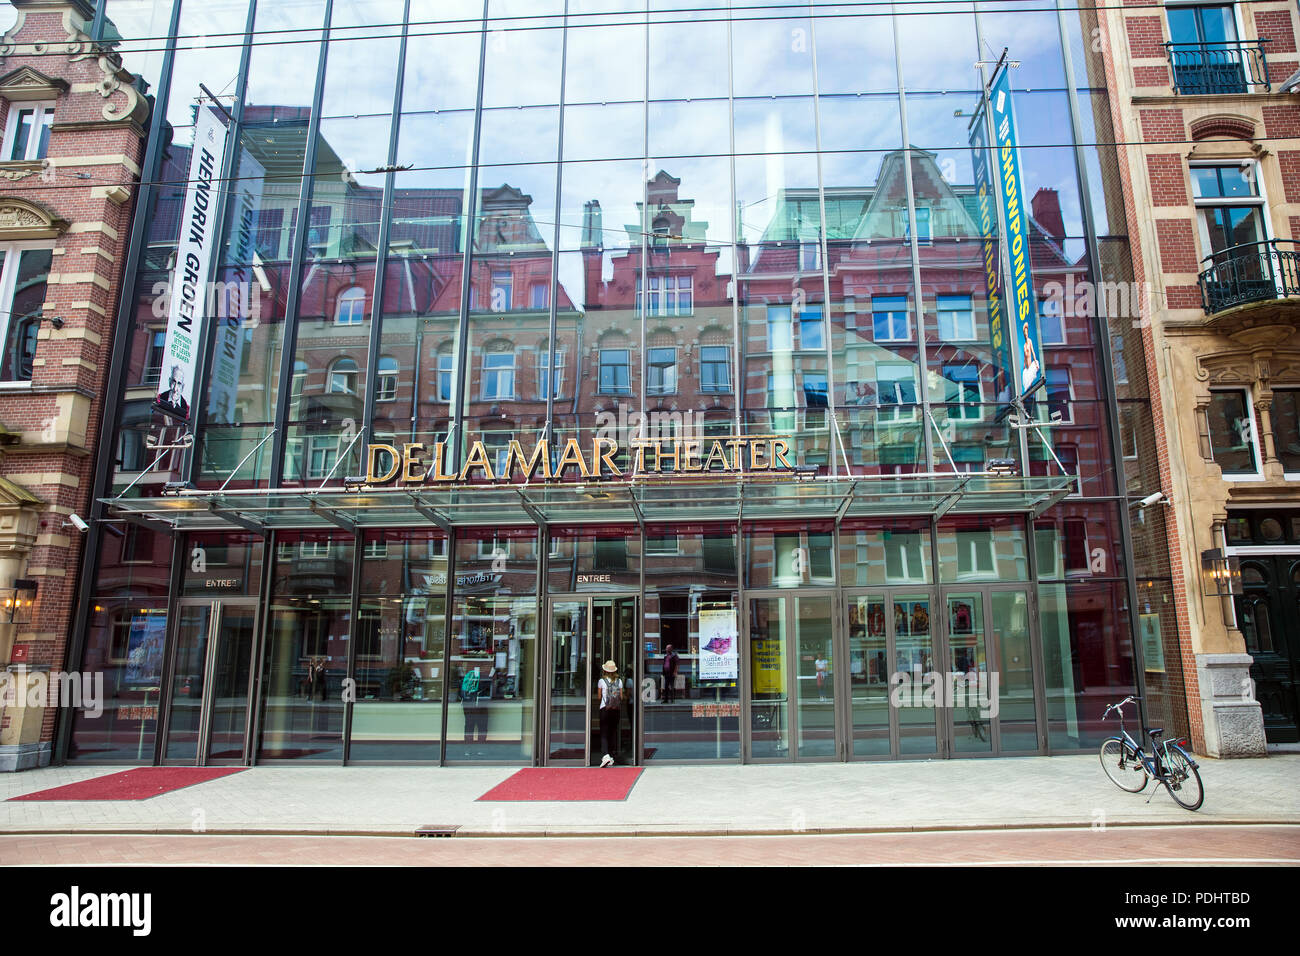 Amsterdam, Netherlands - April, 2018: Delamar theater sign in Amsterdam city Stock Photo